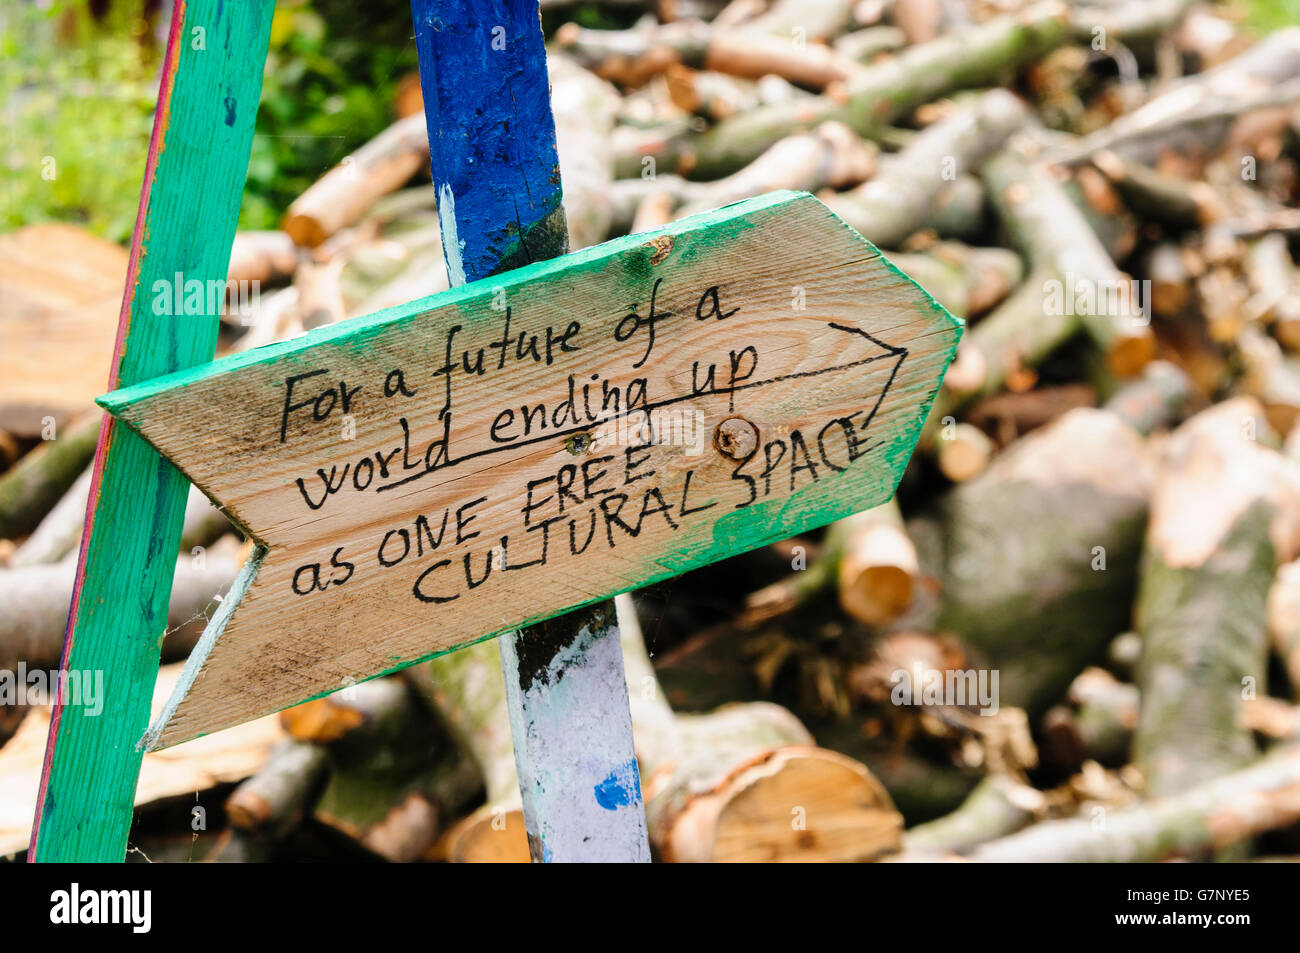 Sign saying 'For a future of a world ending up as one free cultural space' on a pile of wood for a woodburning stove Stock Photo